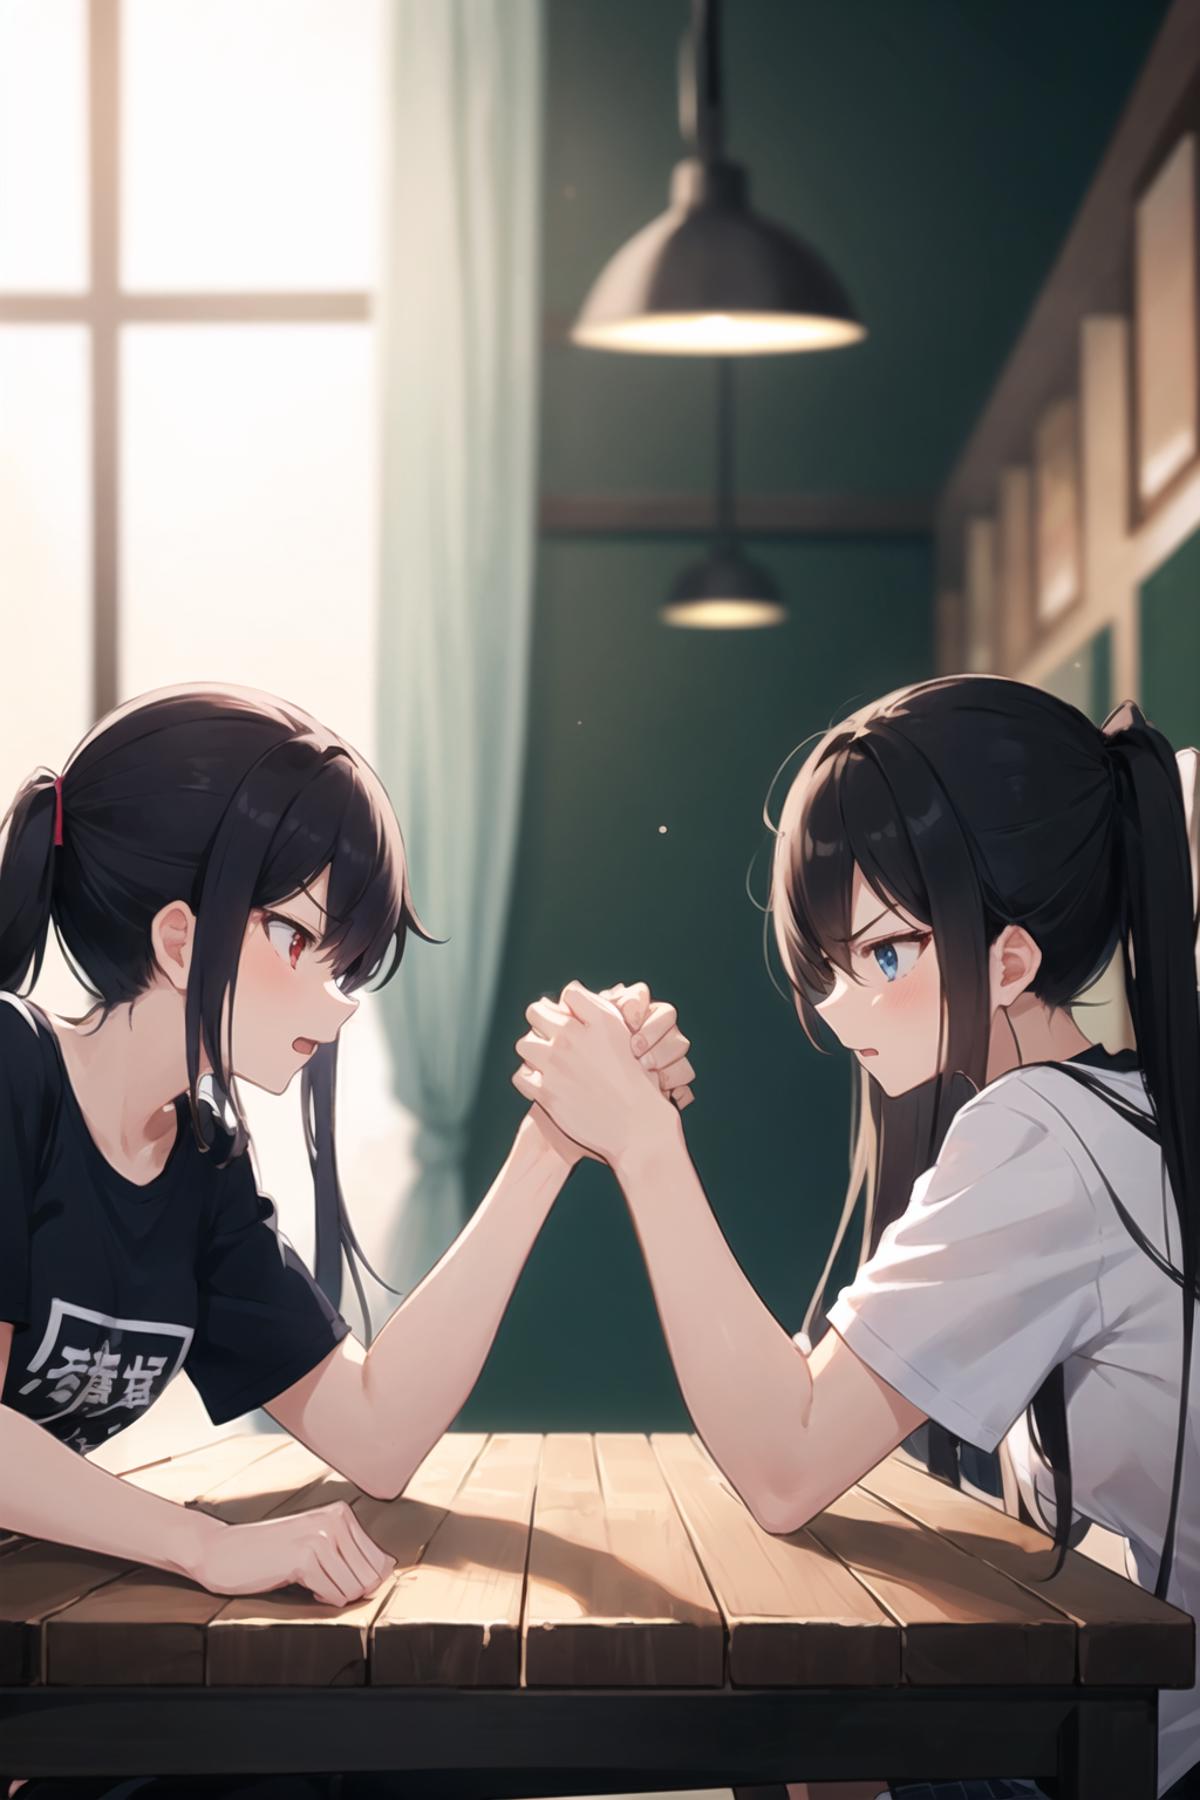 [OpenPose + Canny] Arm wrestling image by BlazzzX4